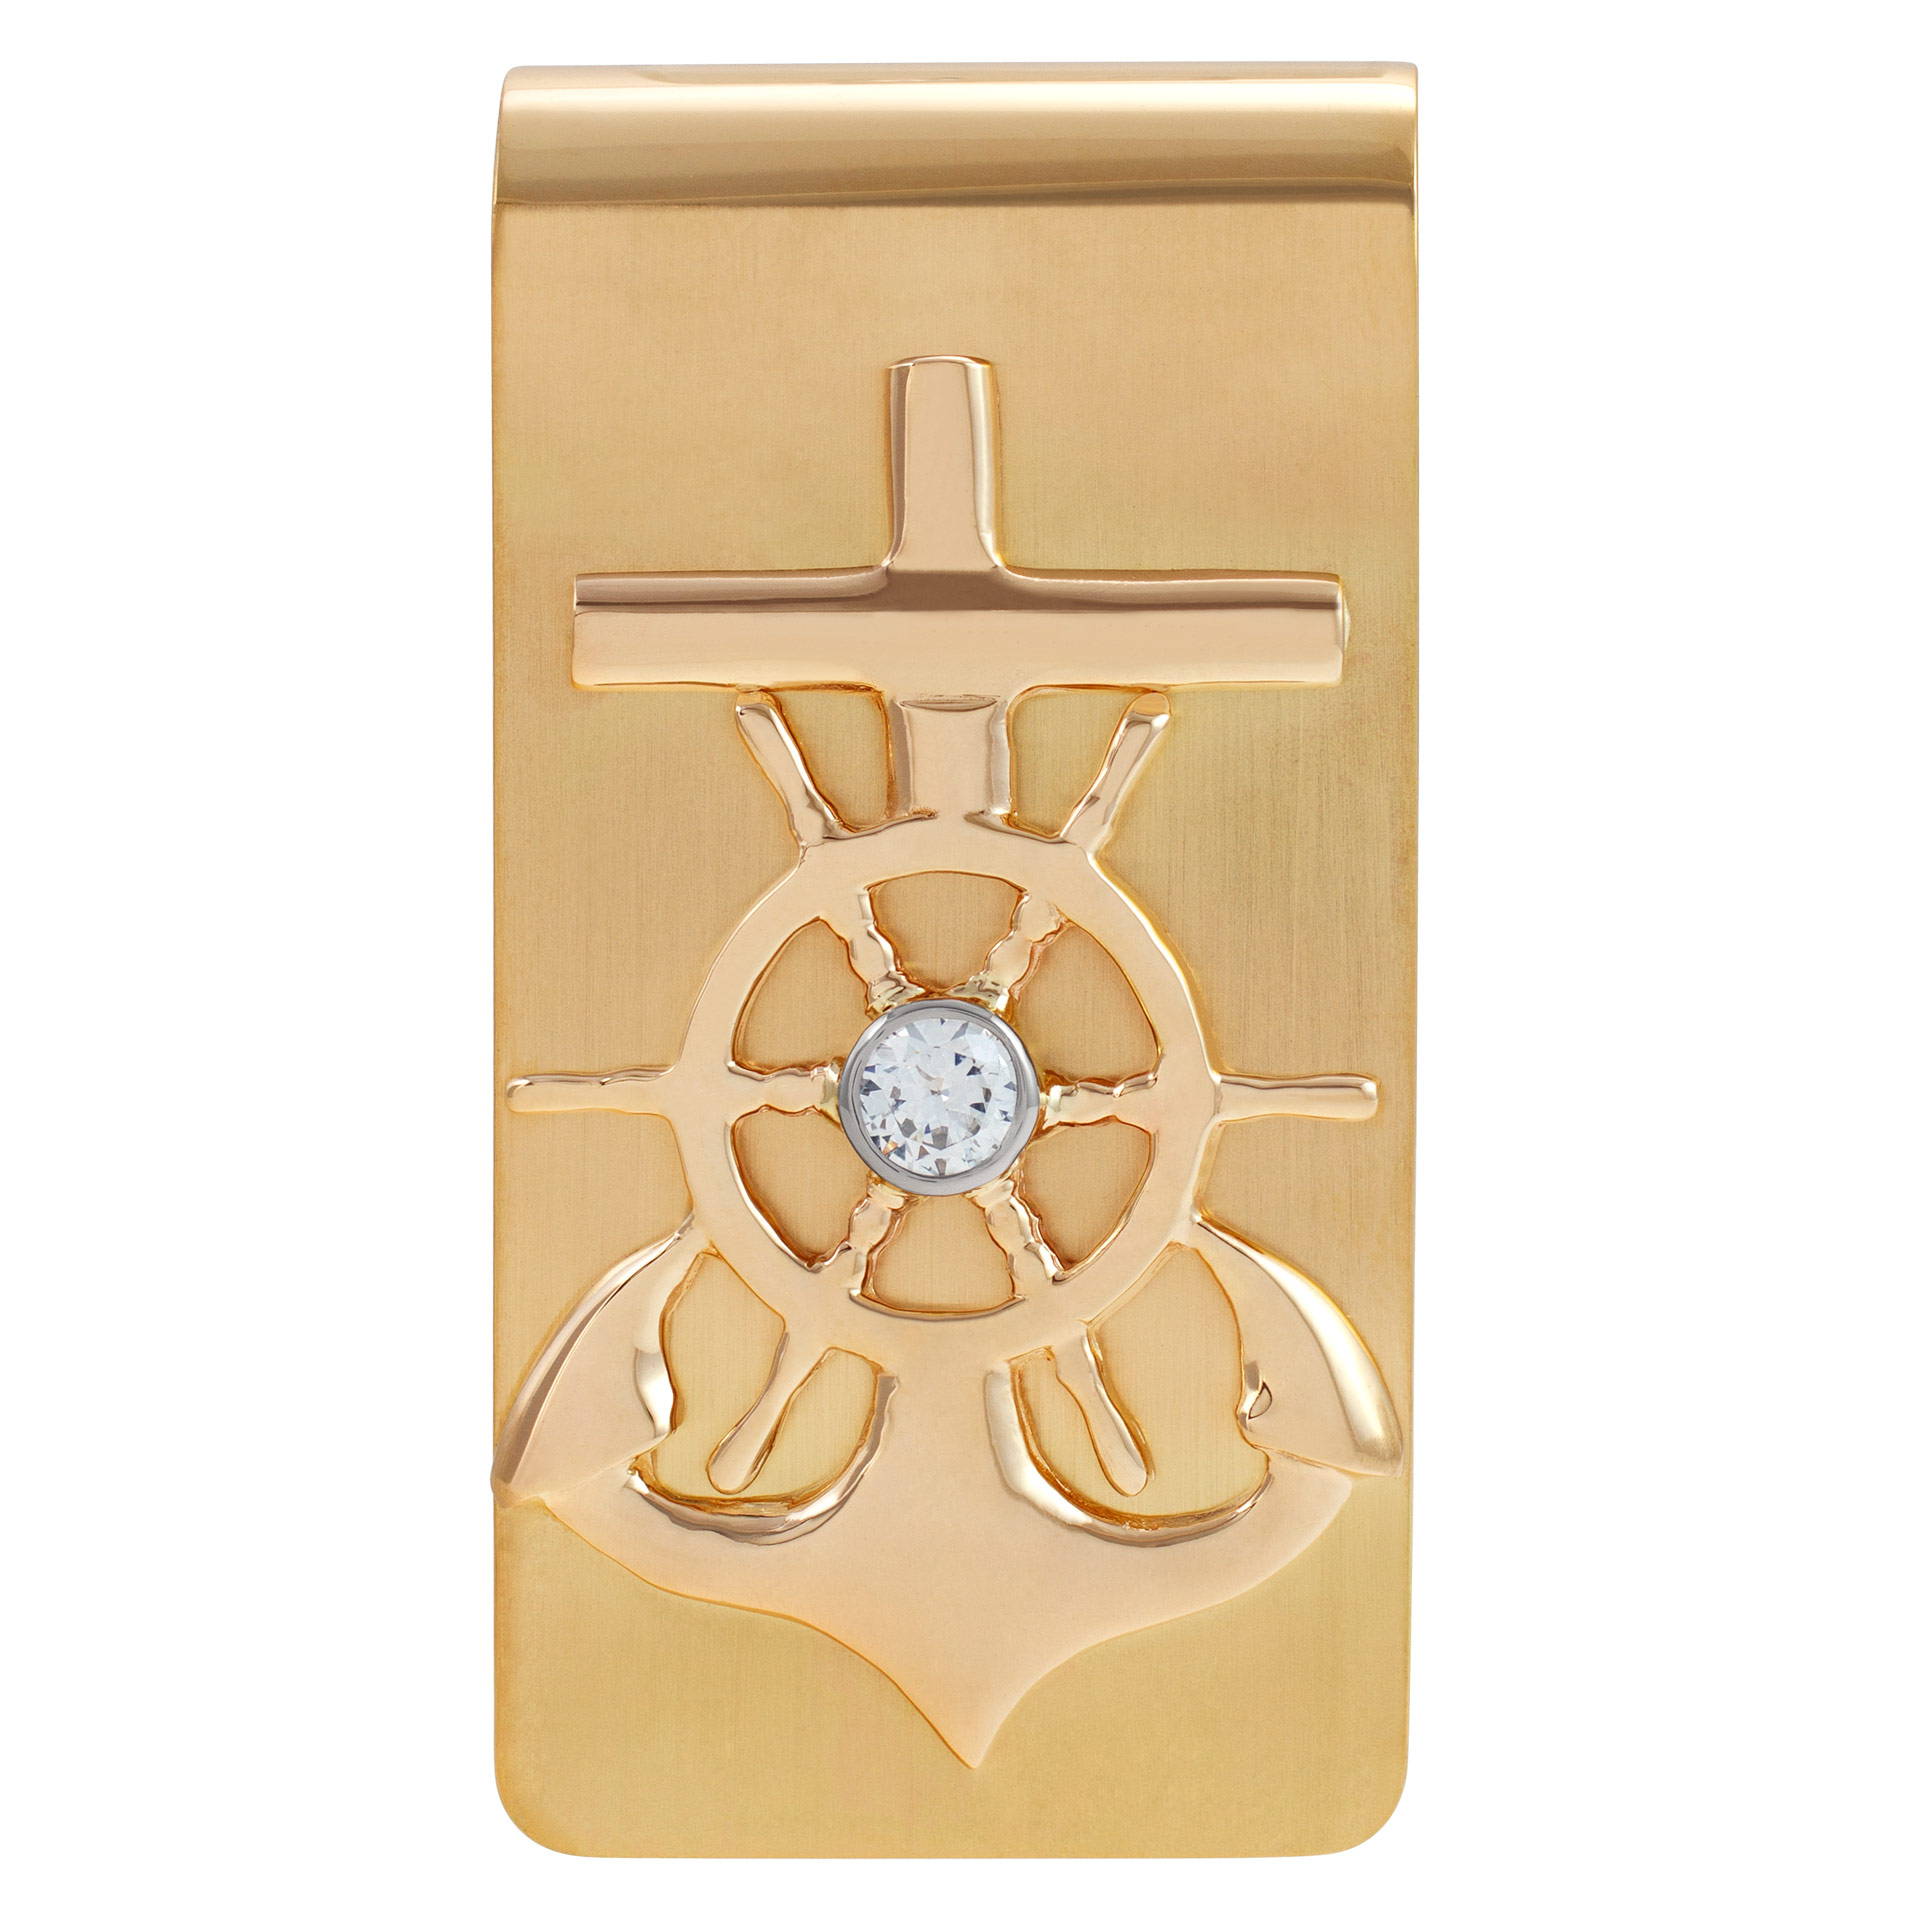 Ahoy, Matey! 18k money clip hand made by Gray & Sons with GIA certified 0.47 carat diamond image 1